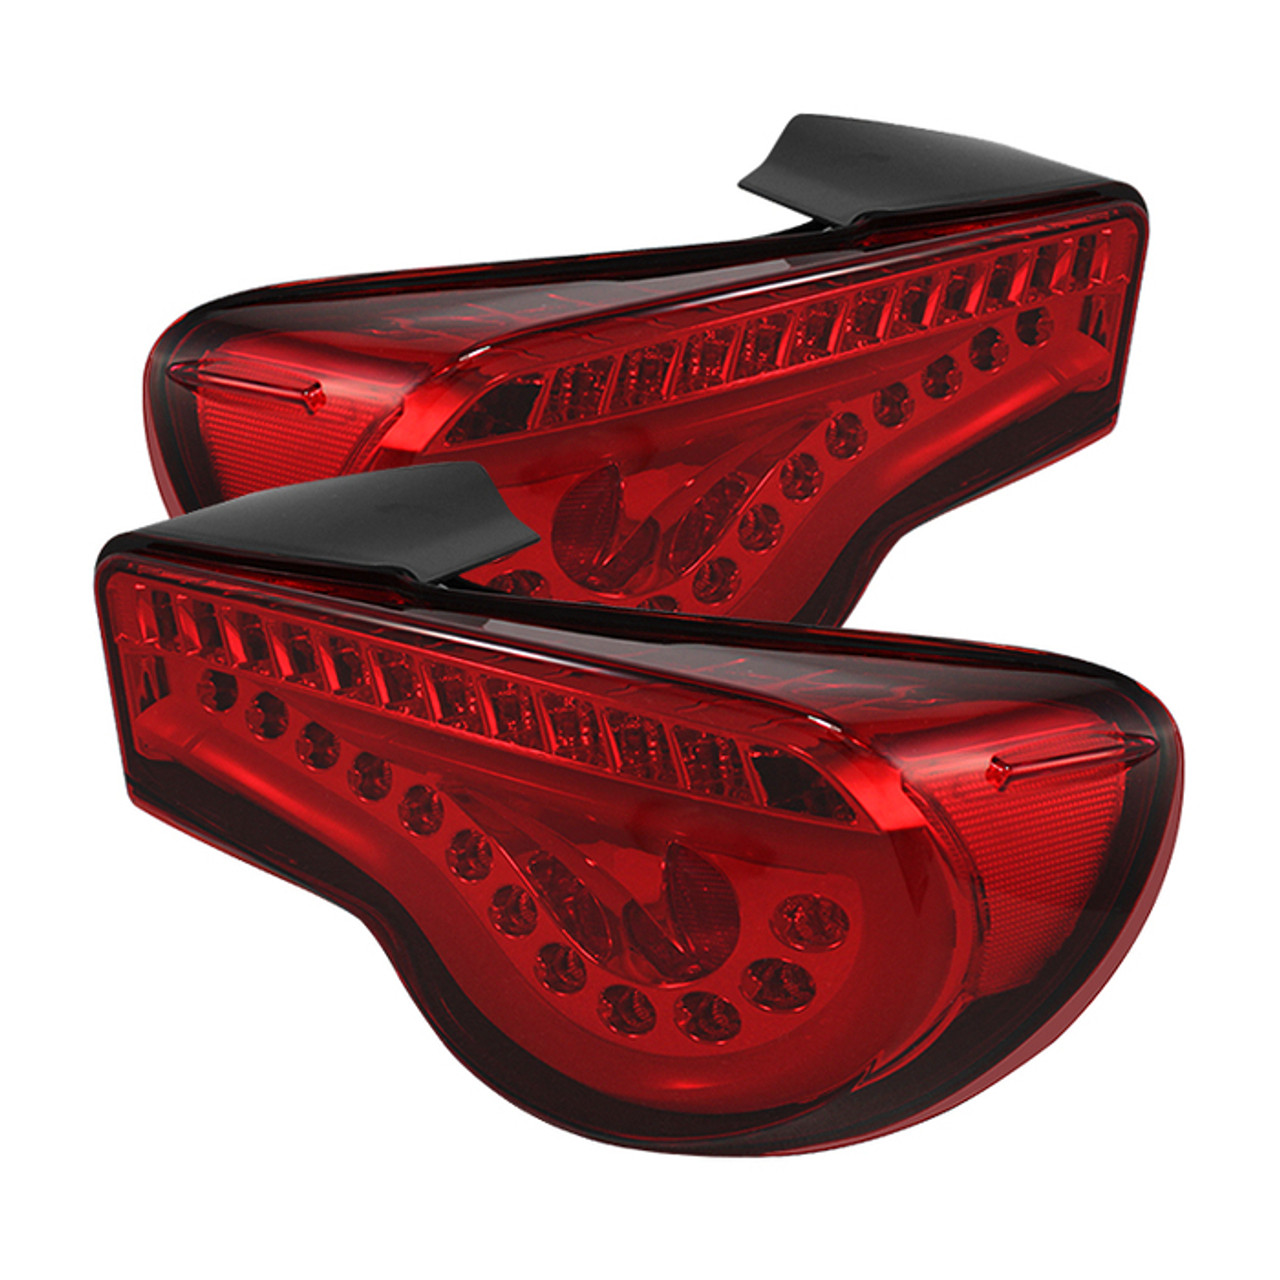 Toyota 86 /Scion FRS LED Tail Lights with sequential turn signal (Red)